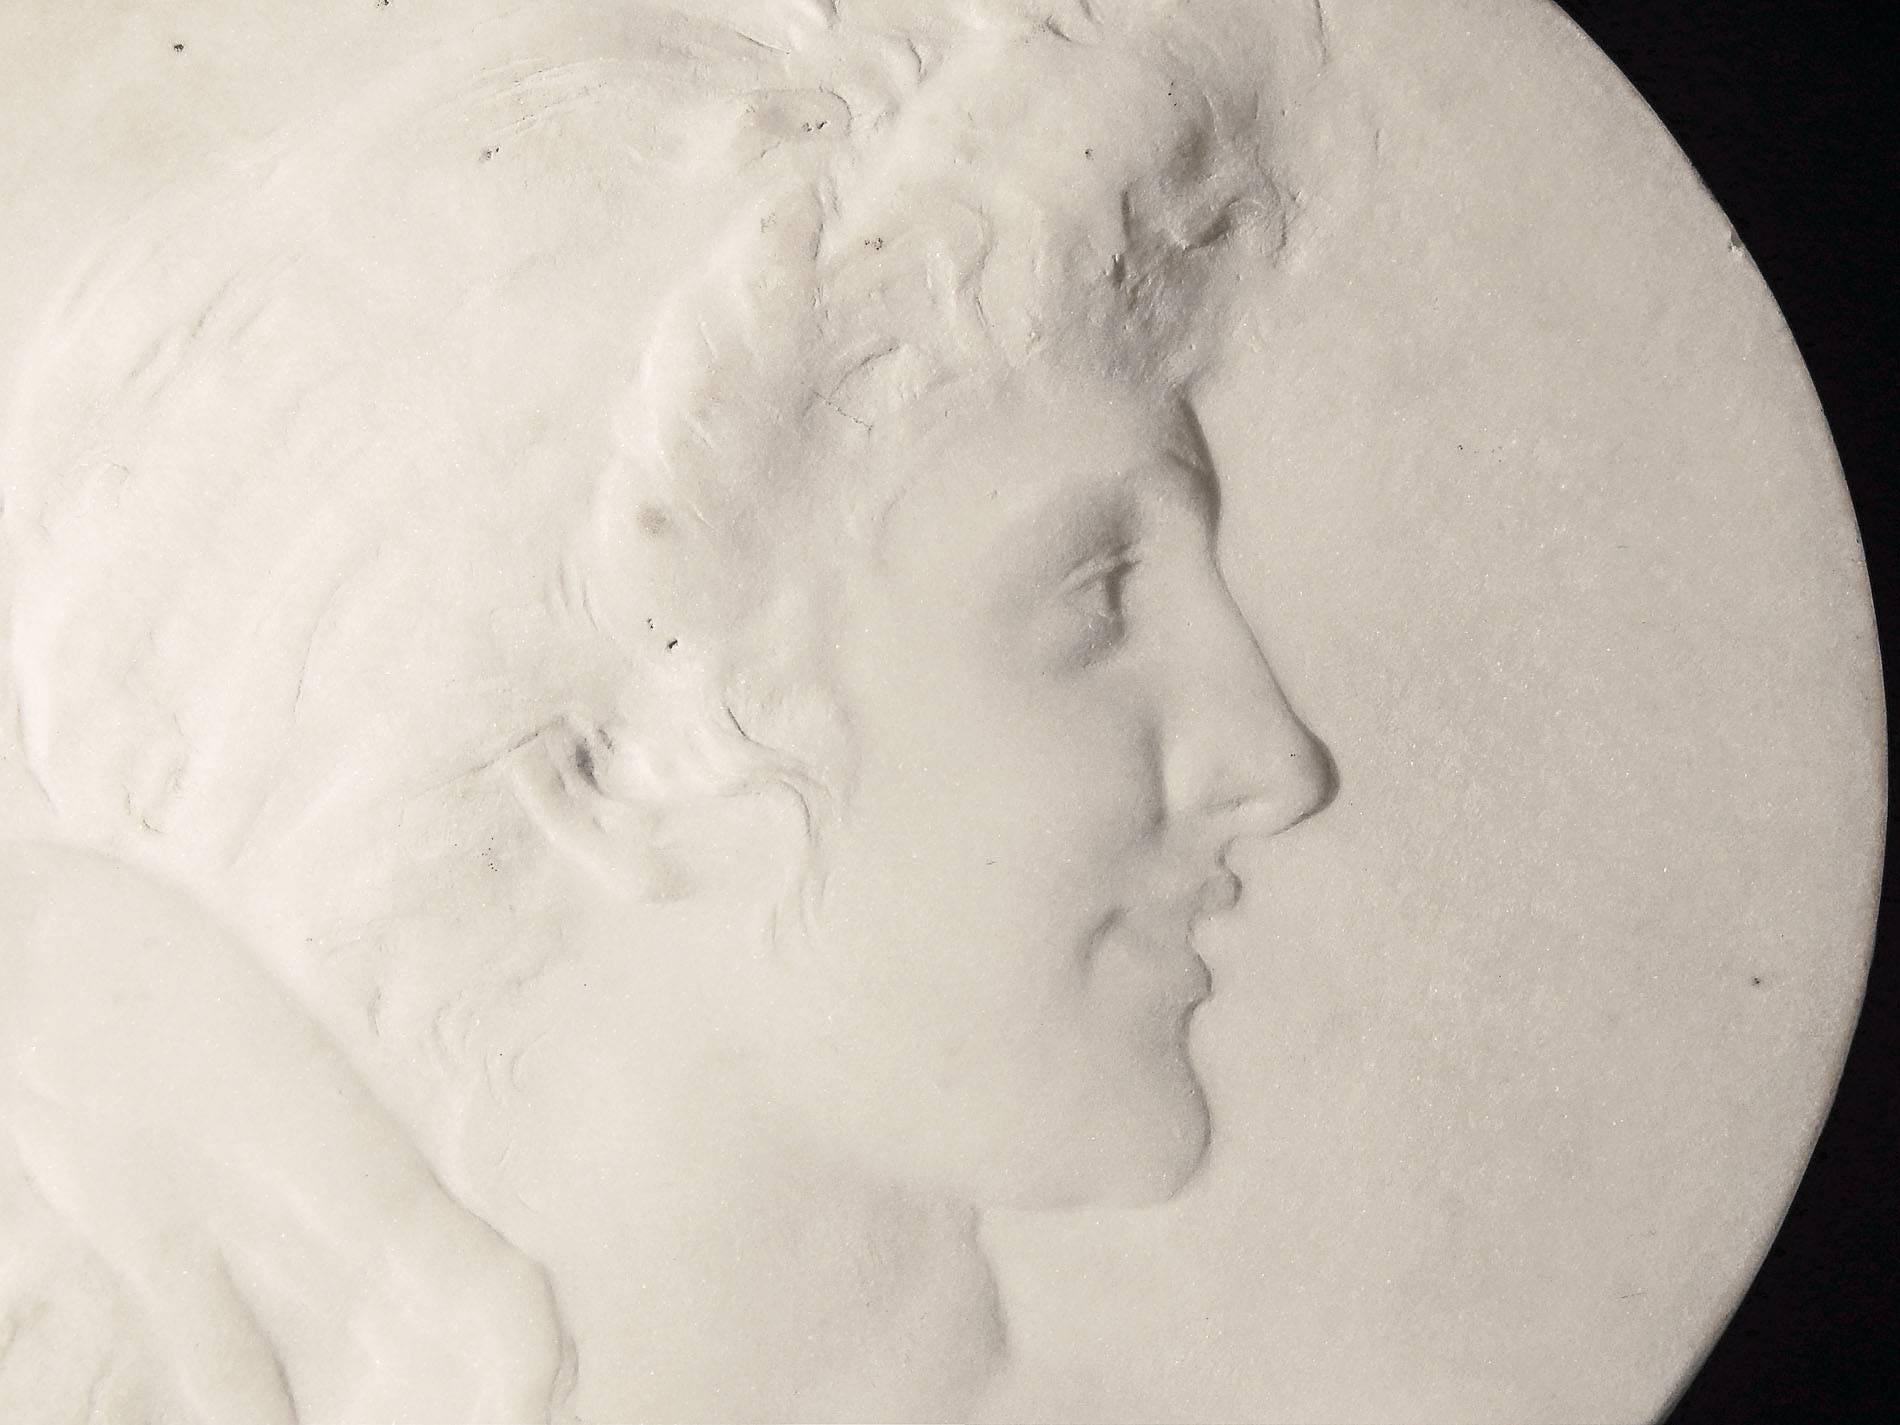 Created by one of the great masters of bas relief sculpture in America, John Flanagan, this profile depiction of the goddess Aphrodite was used as the model for the famous 